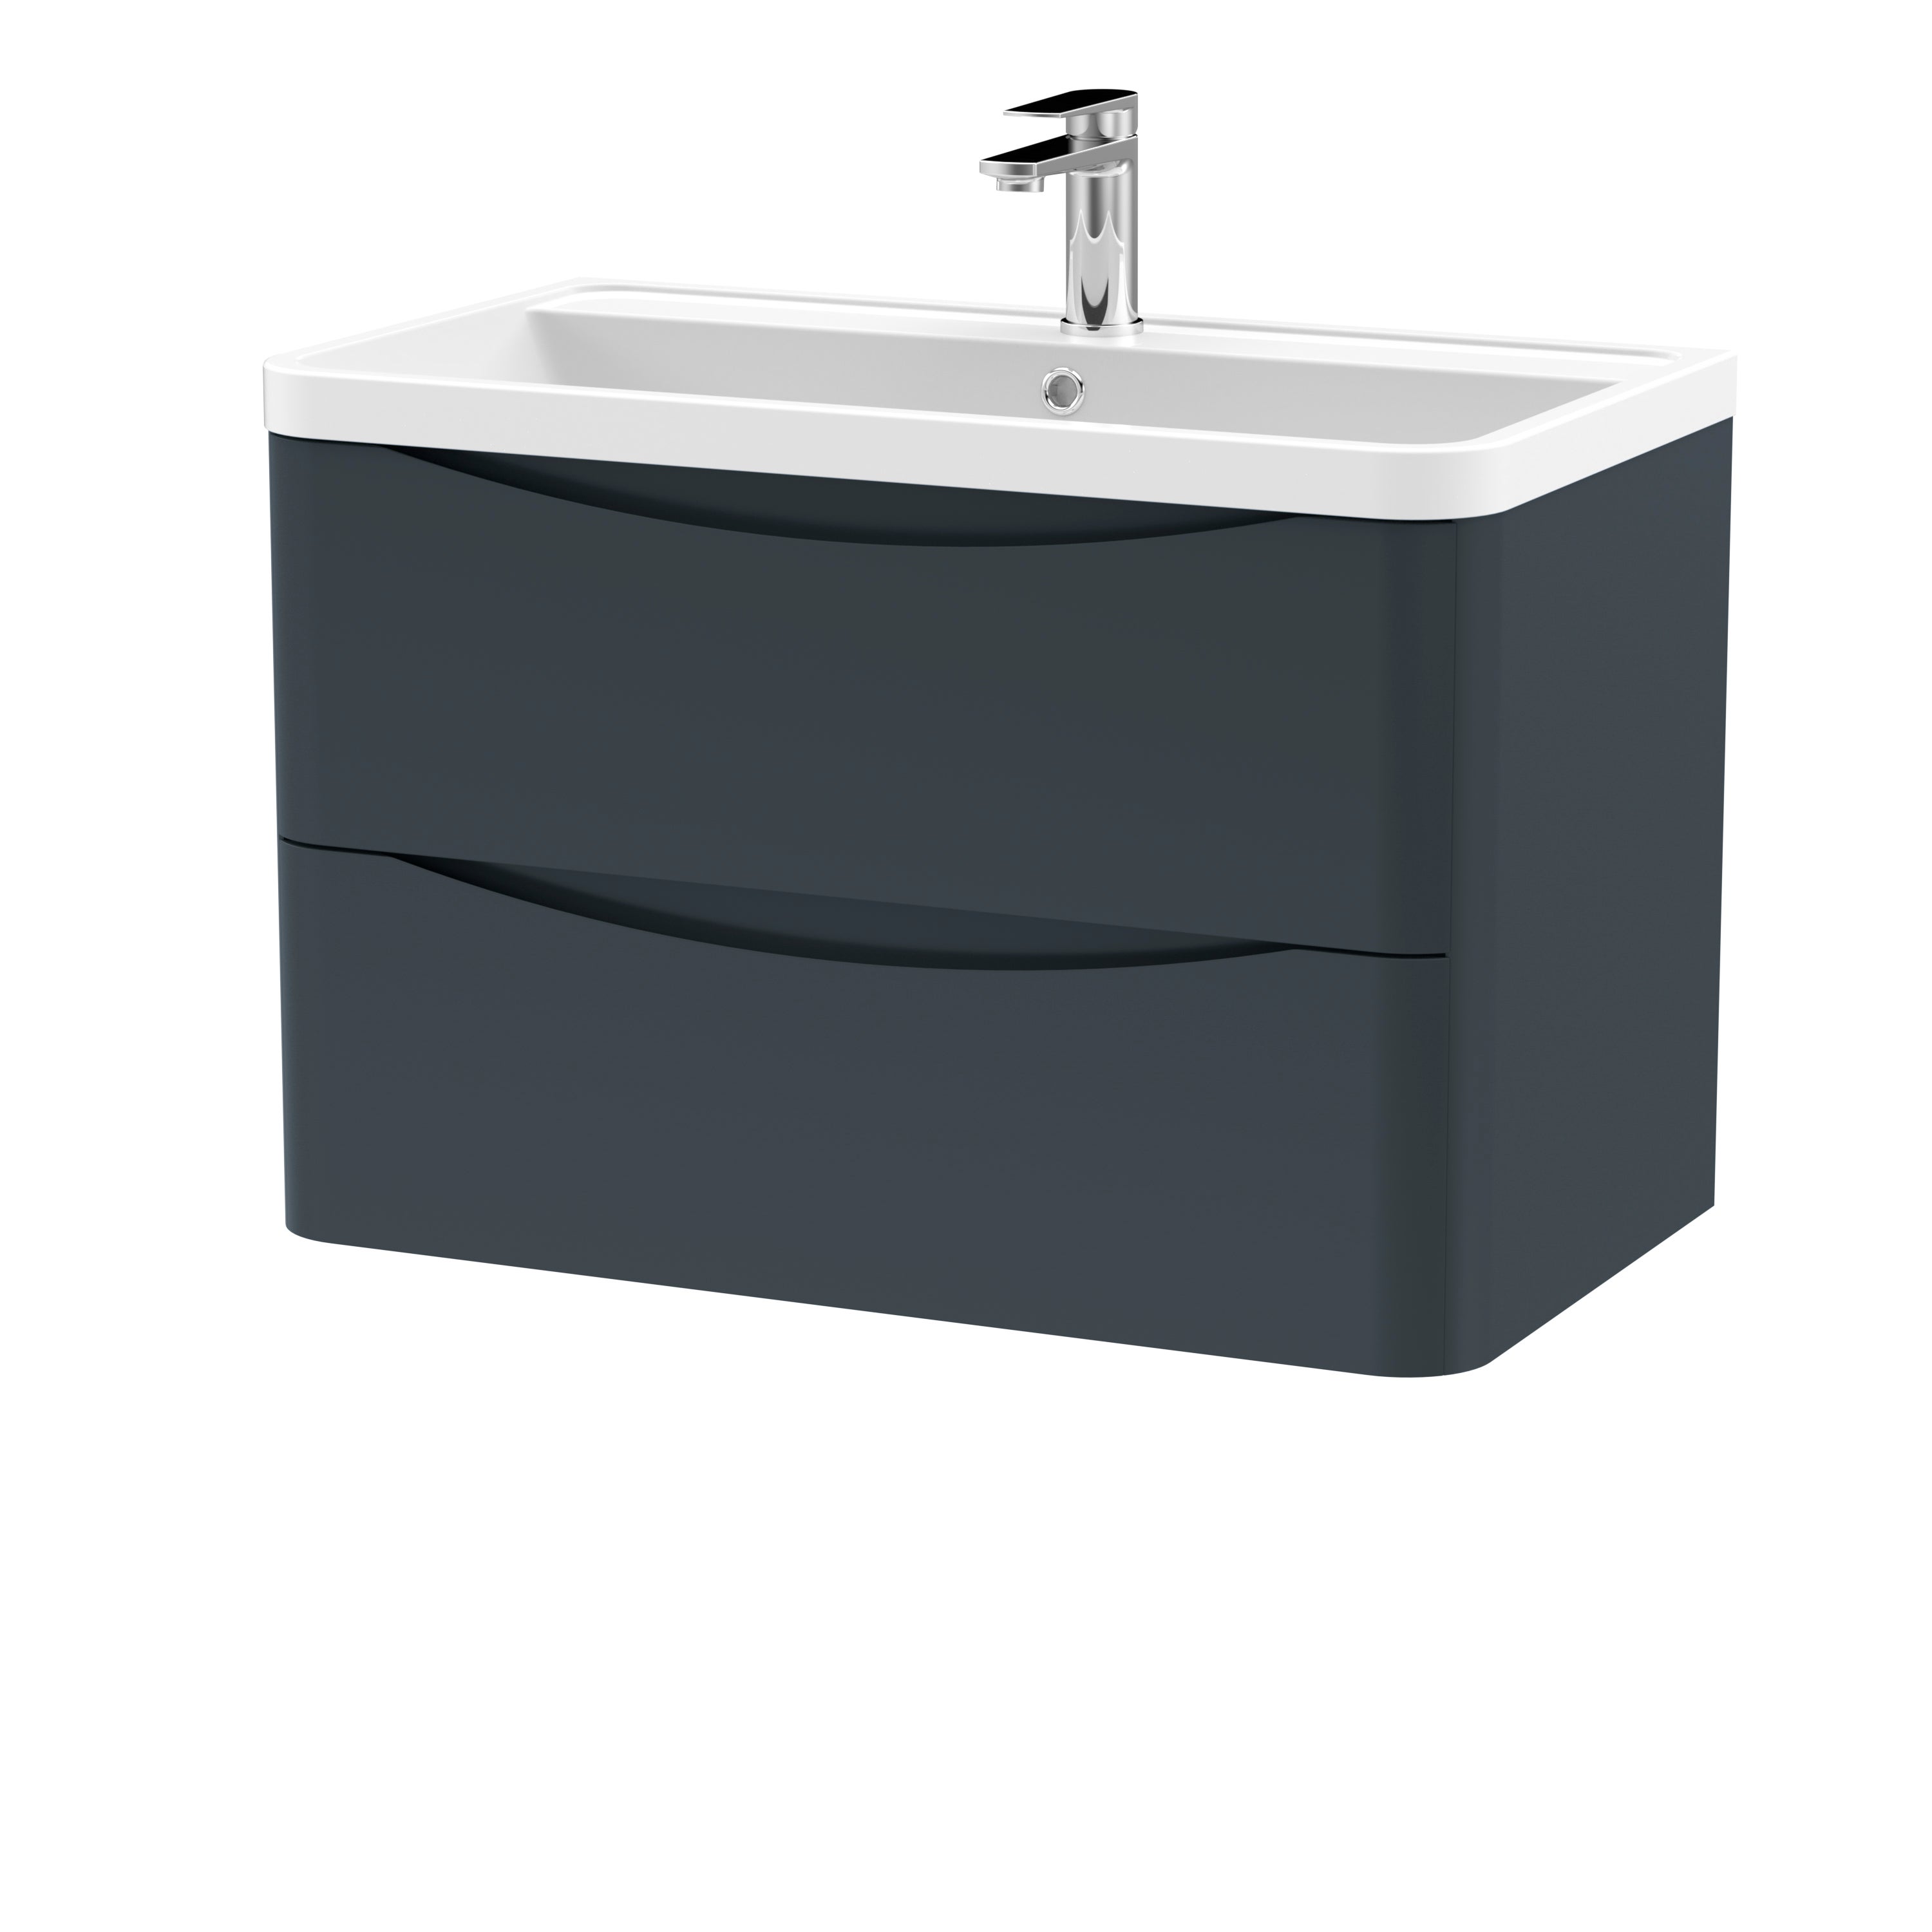 Lunar Wall Mounted 2 Drawer Vanity Unit with Polymarble Basin